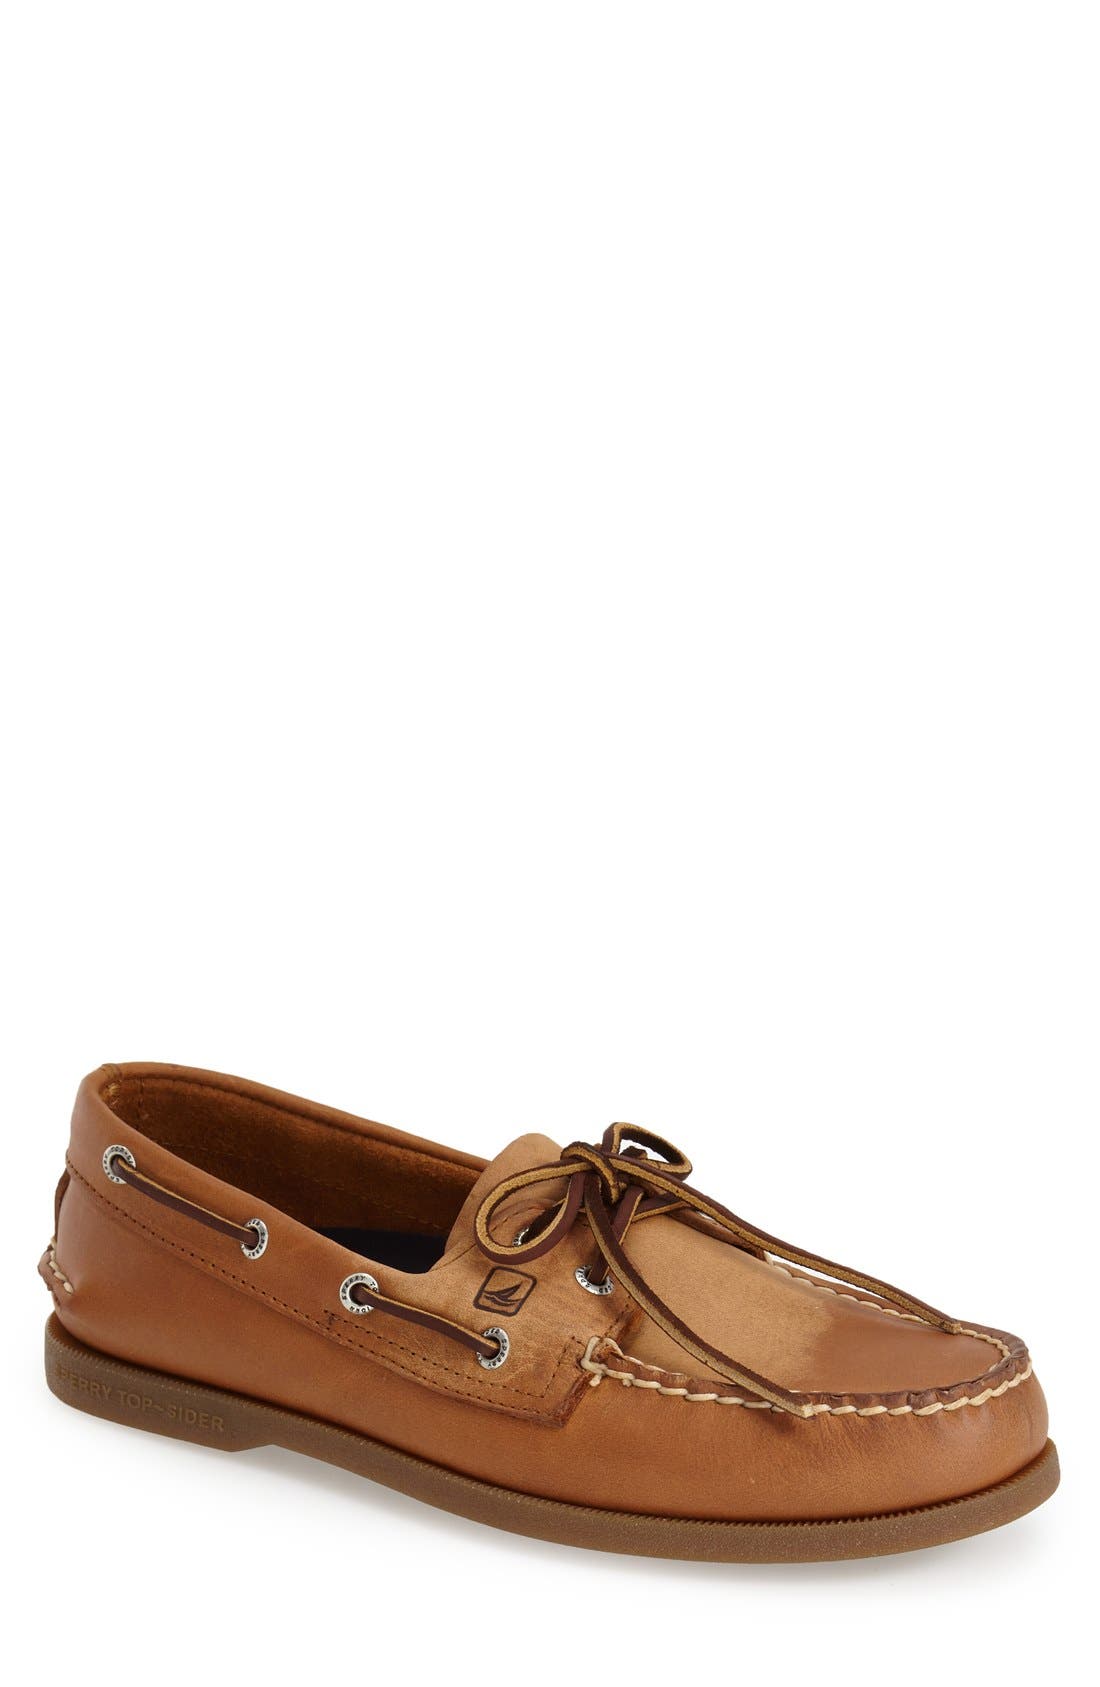 sperry boots on sale